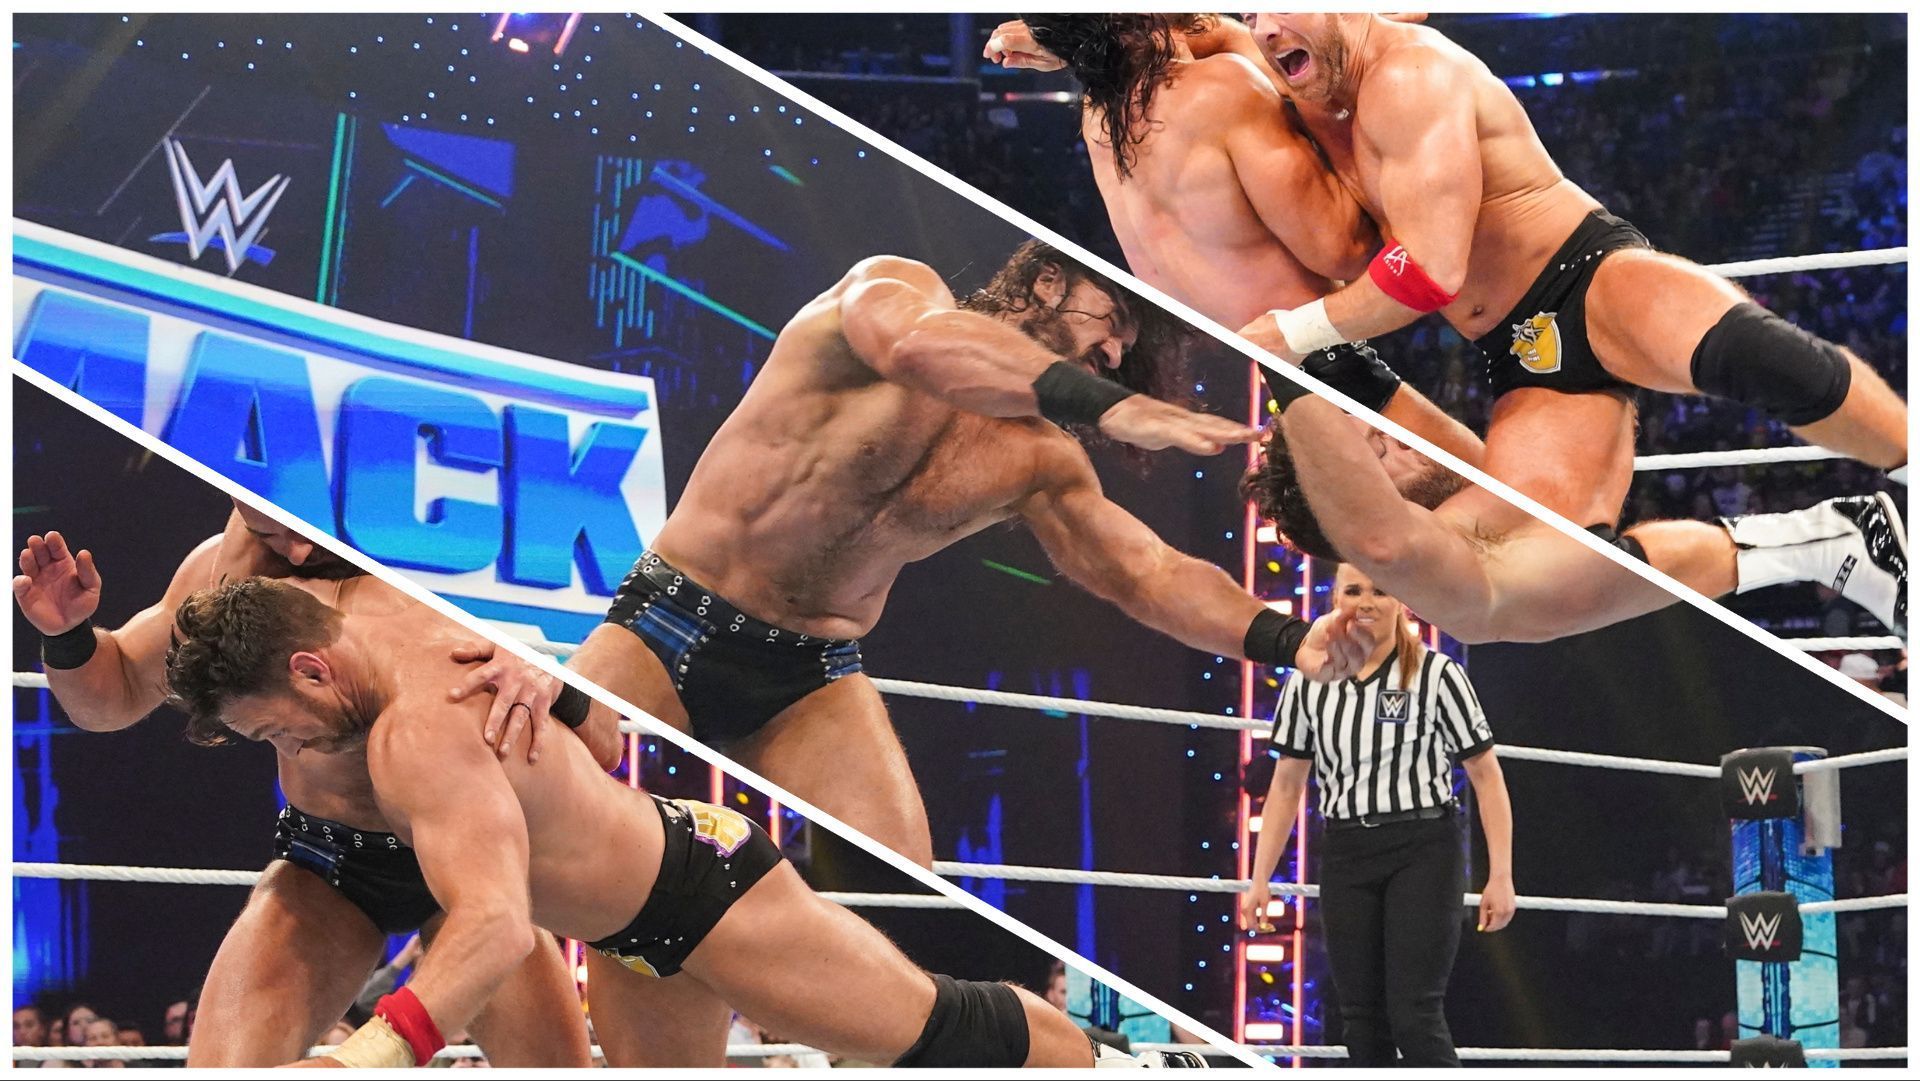 Drew McIntyre and LA Knight in action on WWE SmackDown